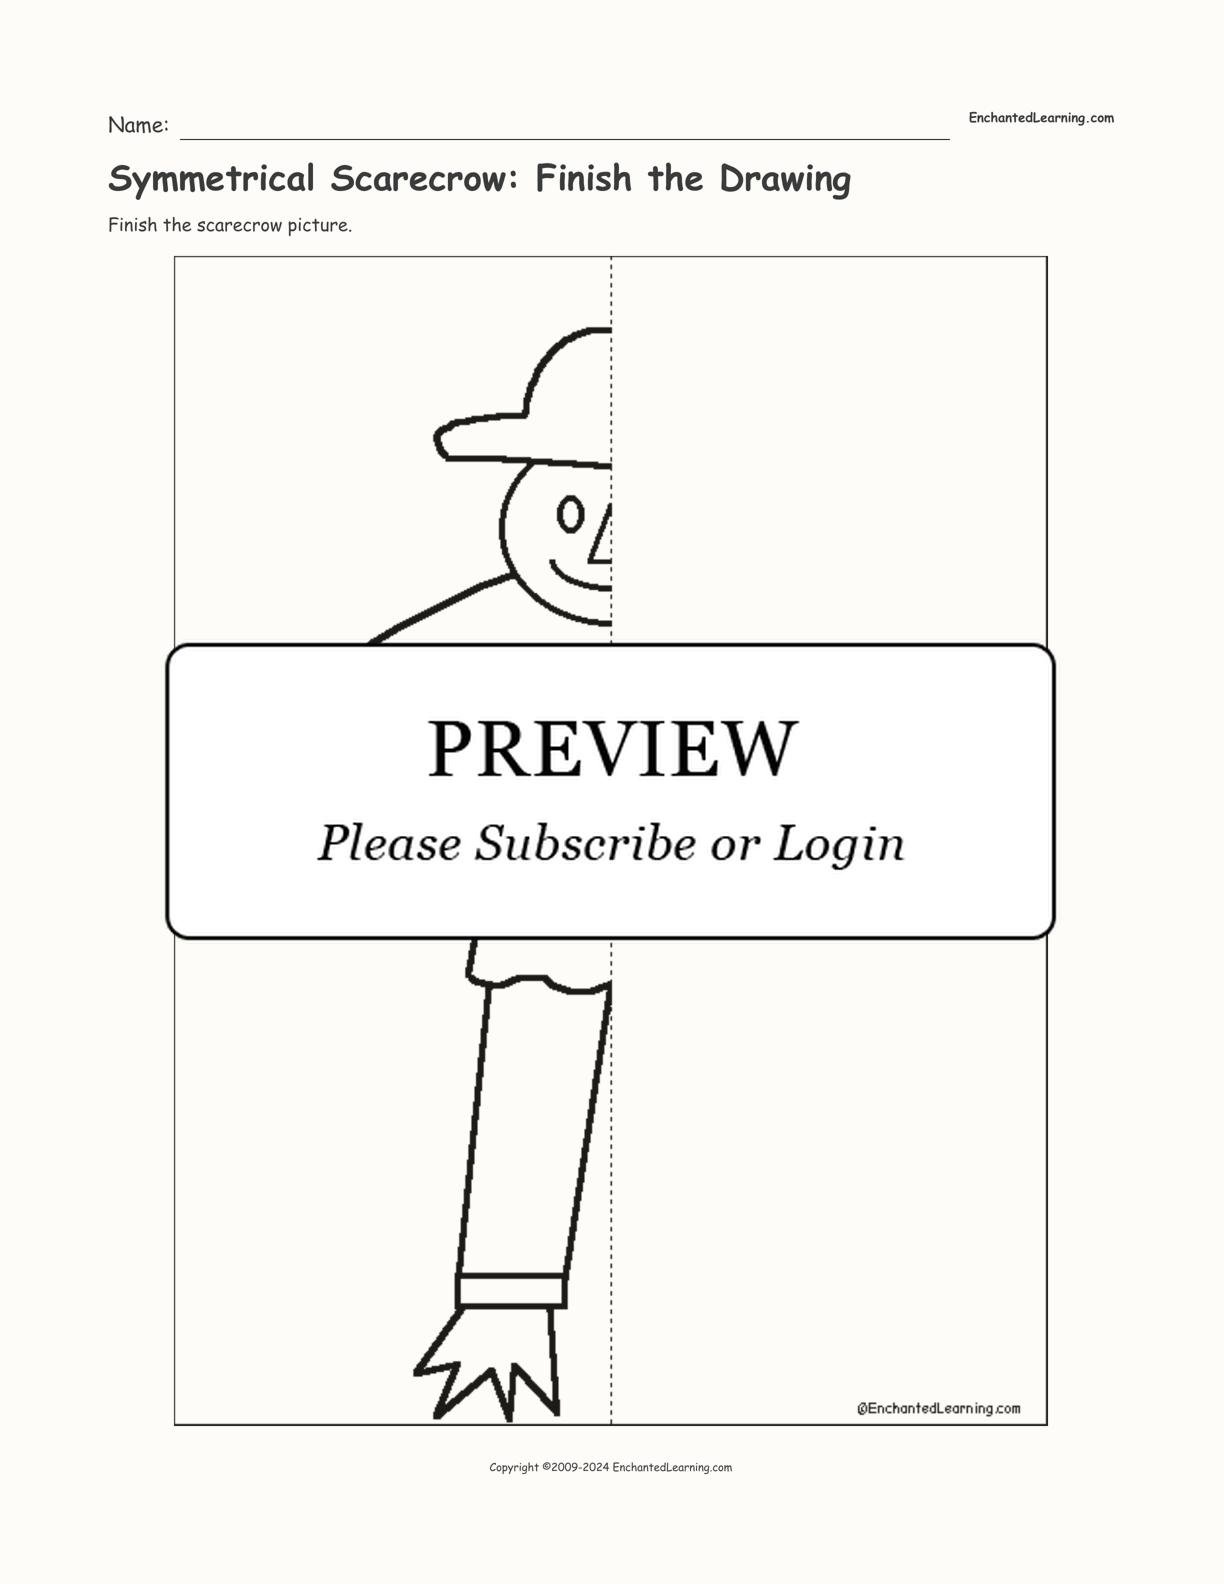 Symmetrical Scarecrow: Finish the Drawing interactive worksheet page 1